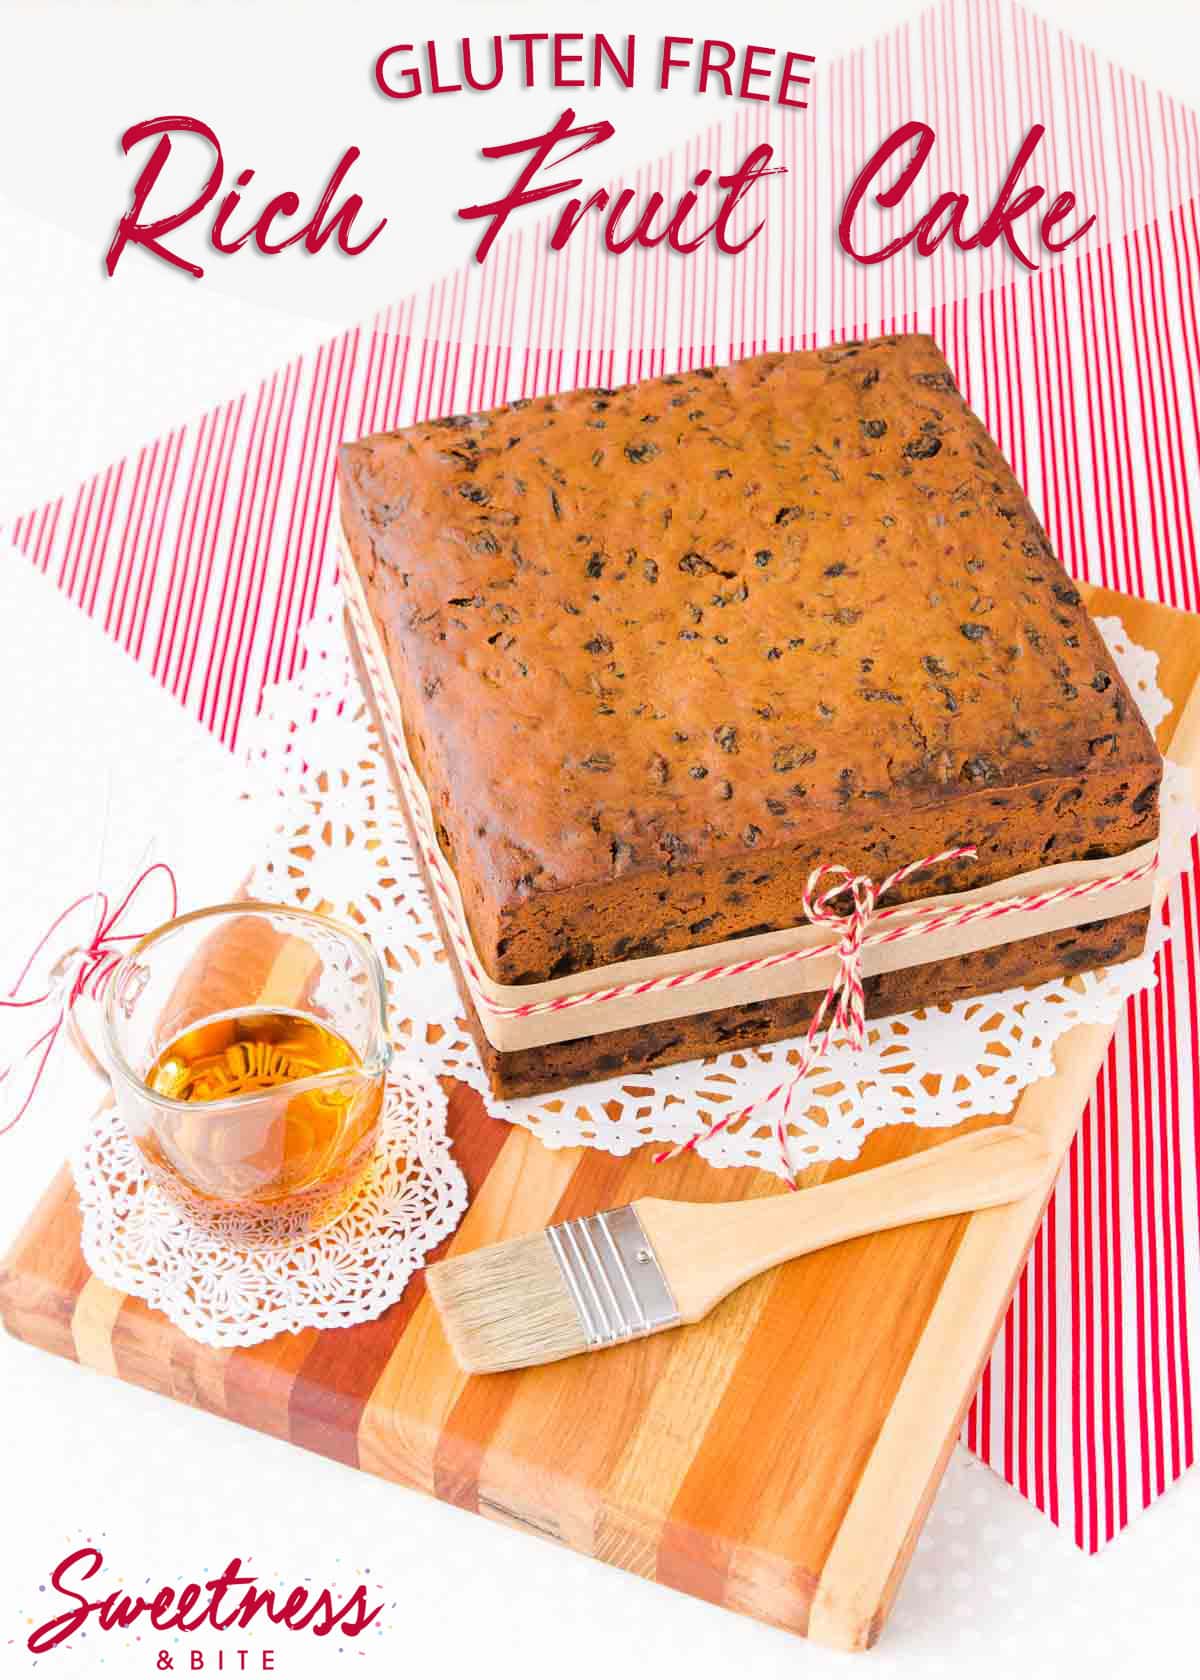 Square gluten free Christmas cake on a wooden board, sitting on a red and white striped cloth, text reads 